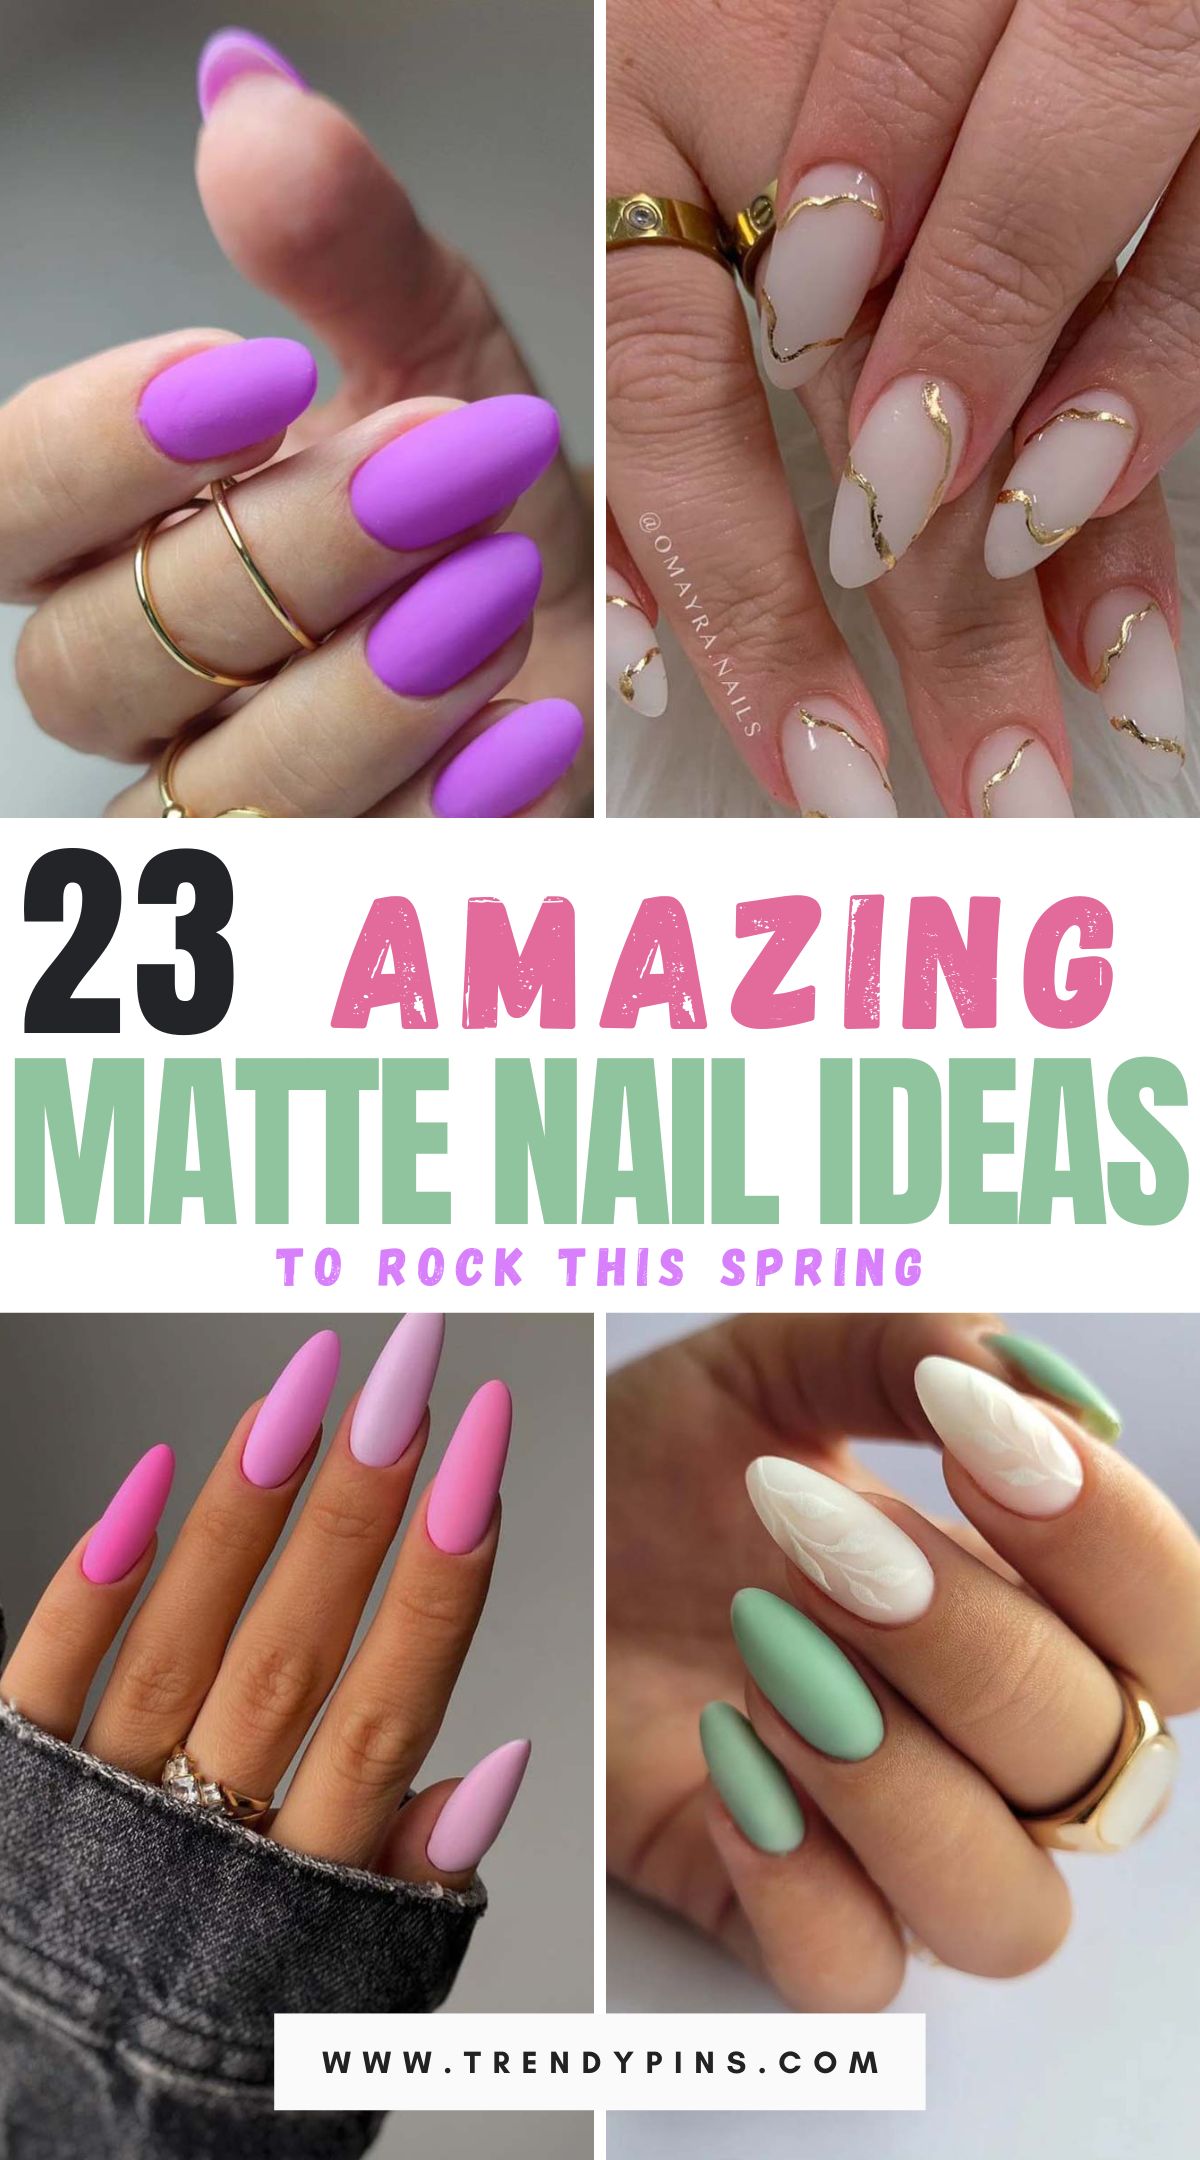 Elevate your manicure game with these 23 trendy spring matte nail designs. From soft pastels to bold florals, explore chic and modern ideas that will inspire your next nail appointment and keep your fingertips on-trend this season.